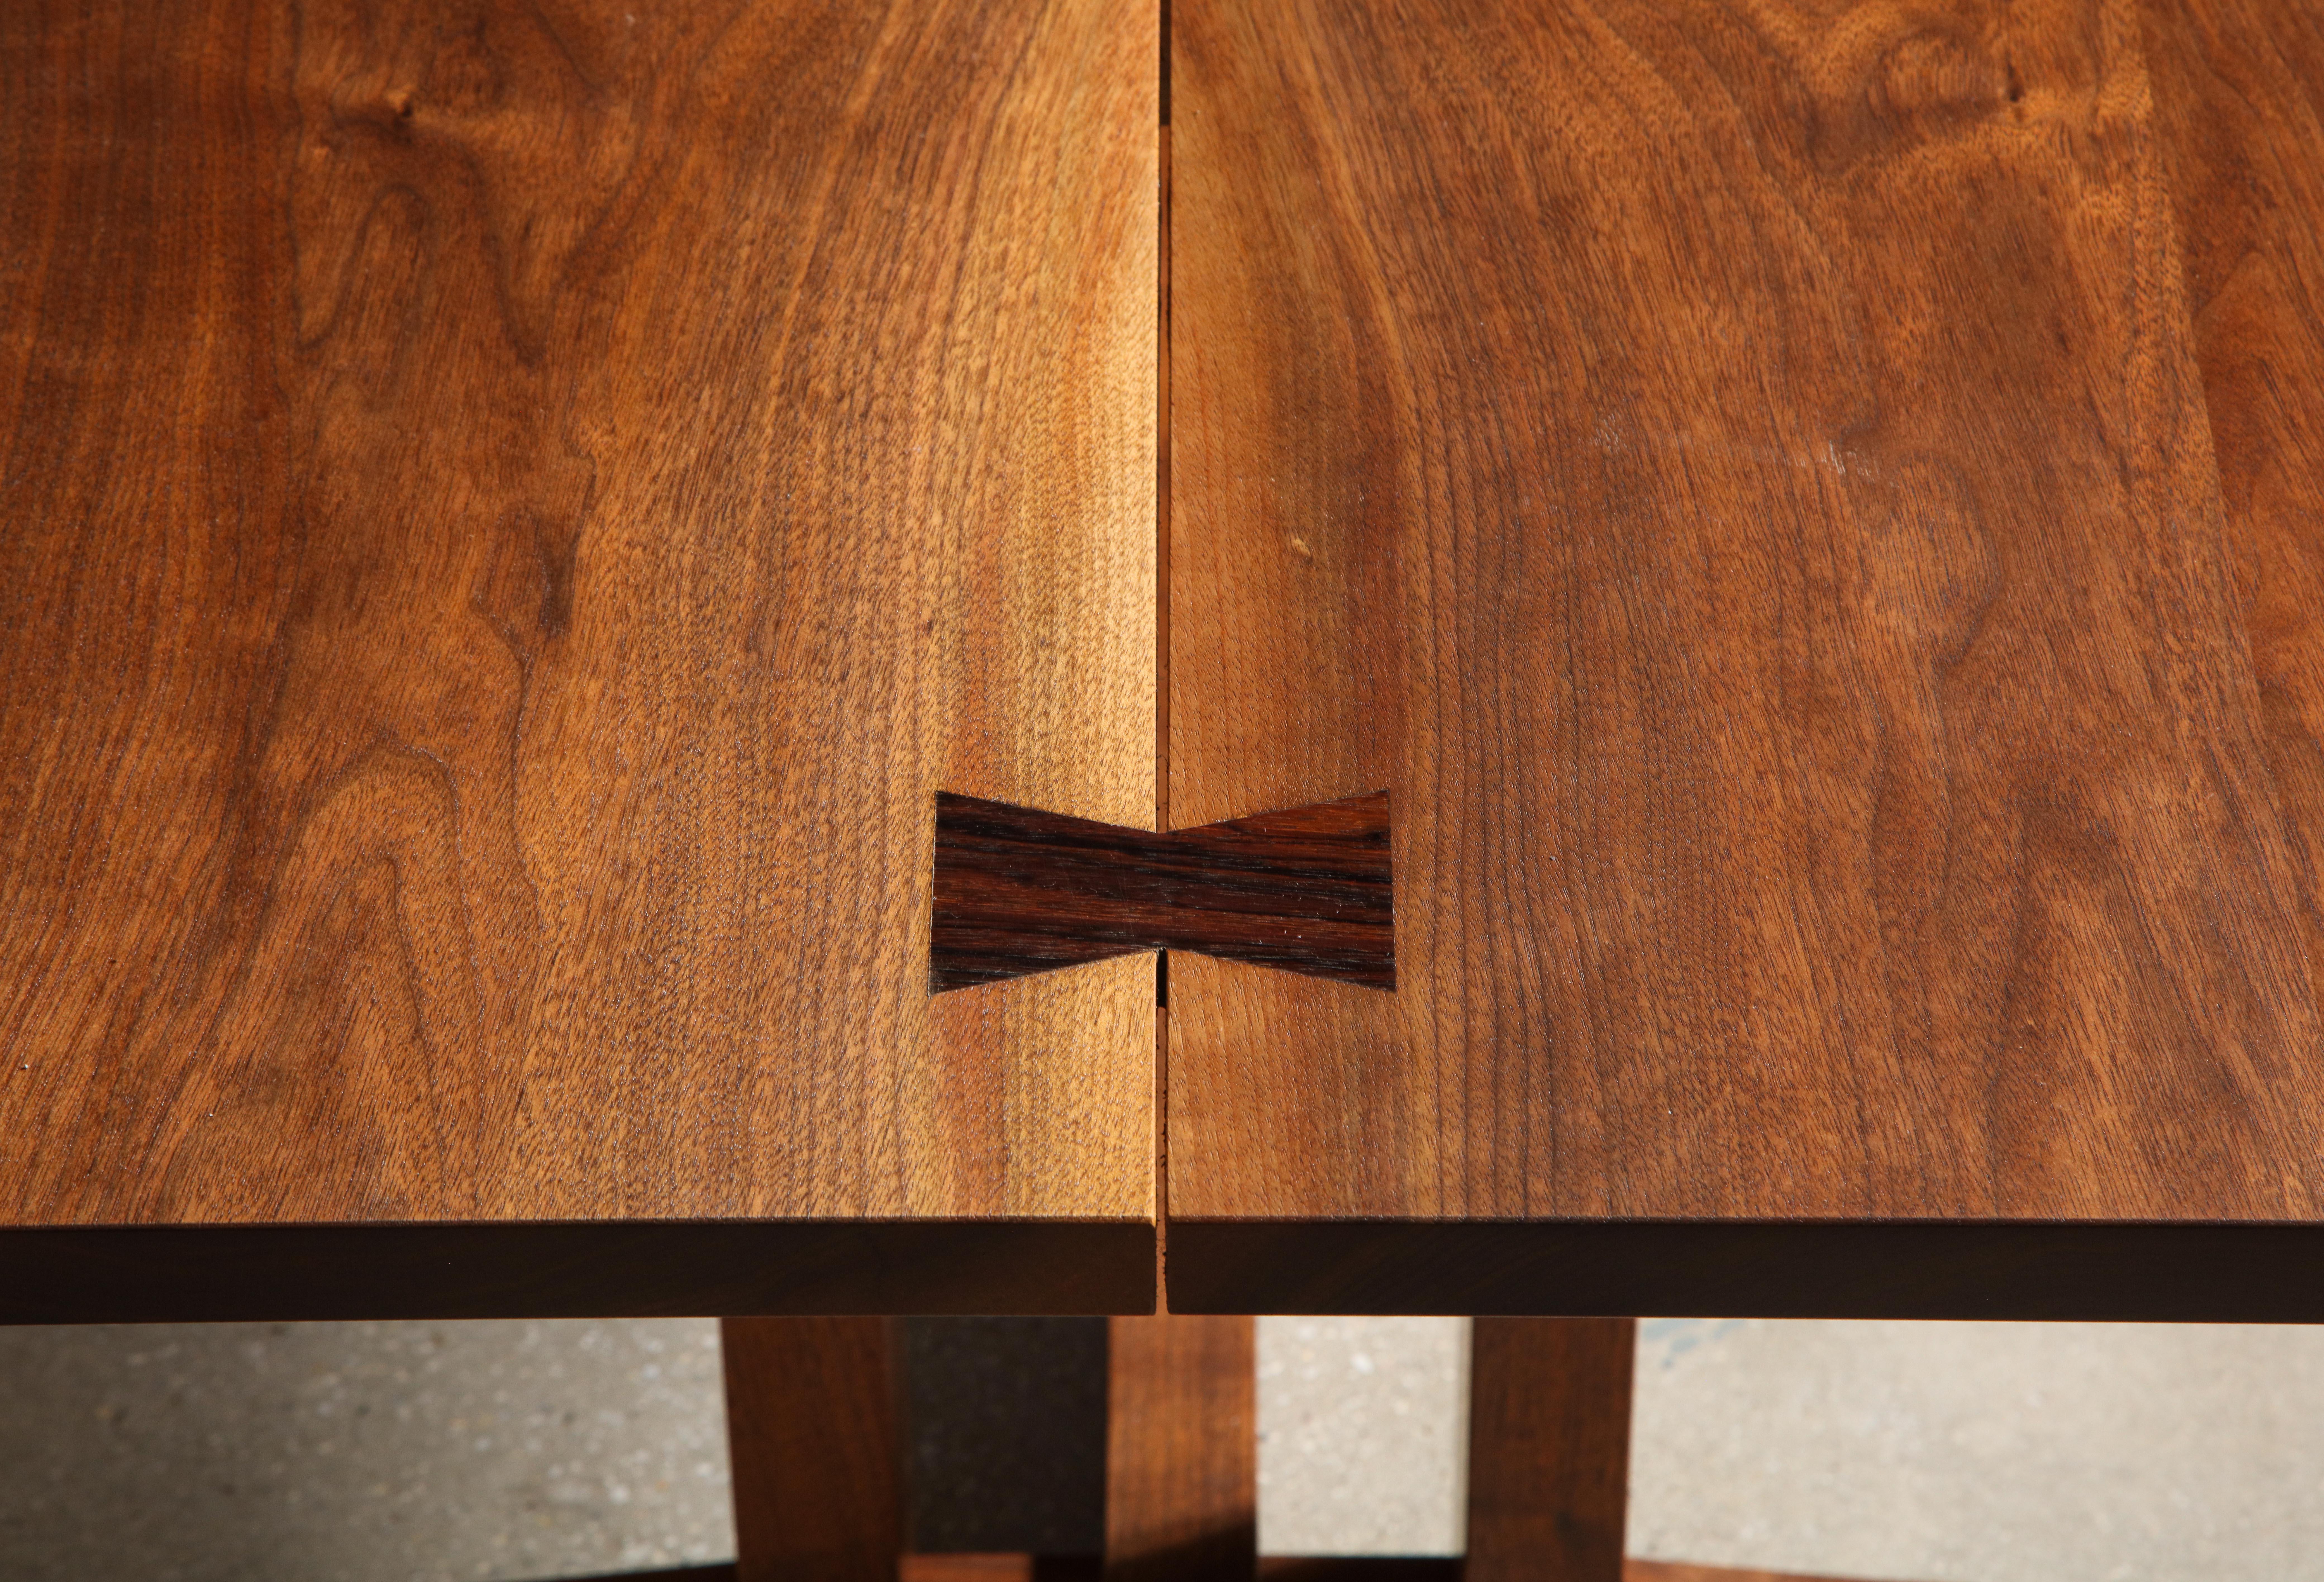 American Craftsman Superb Walnut Frenchman’s Cove Dining Table, by George Nakashima, 1967